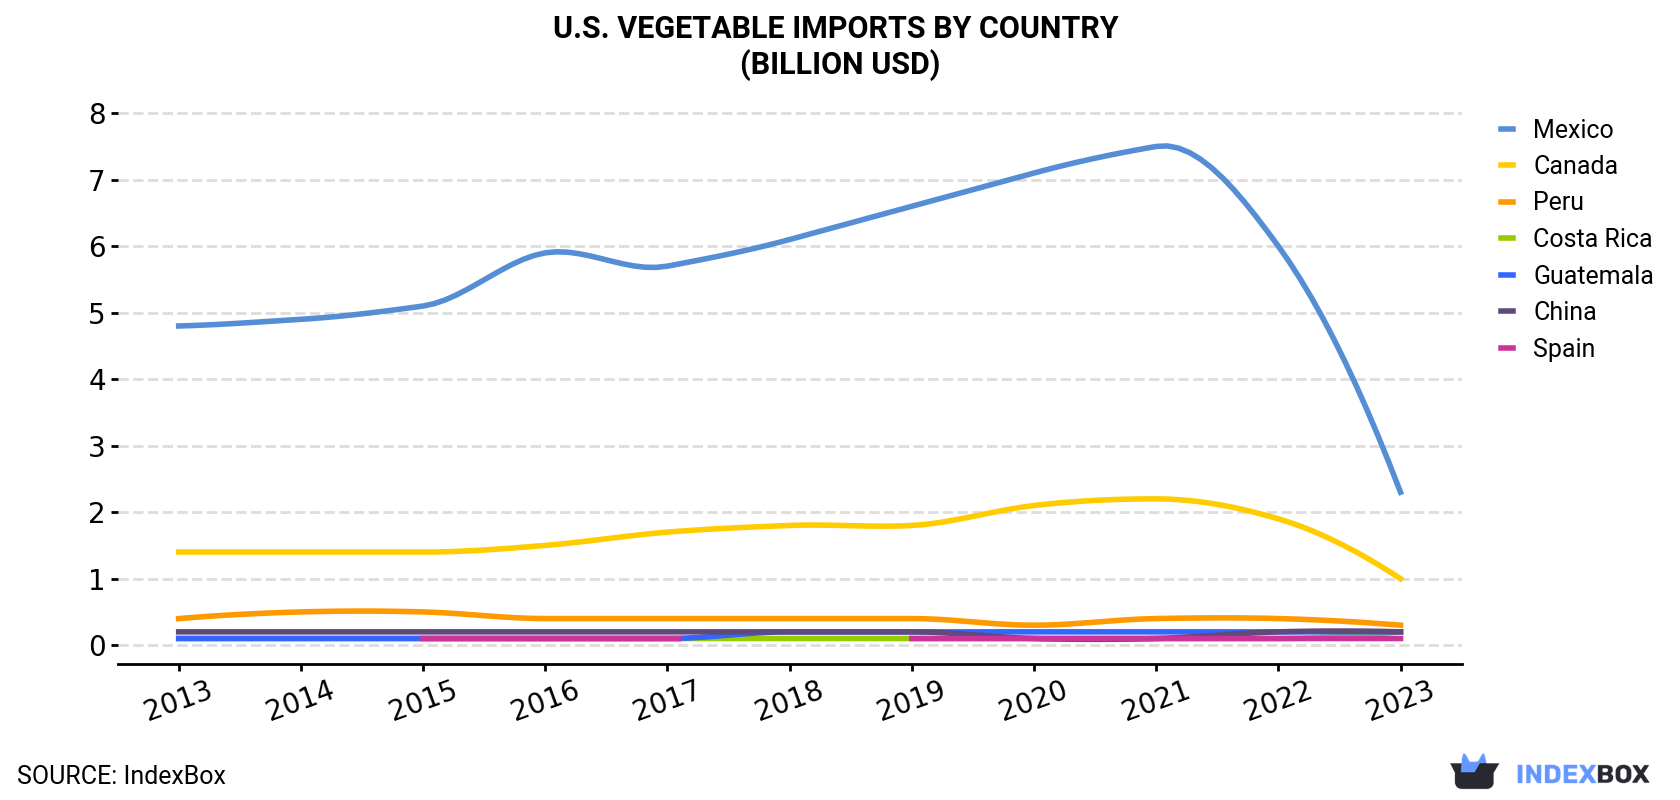 U.S. Vegetable Imports By Country (Billion USD)